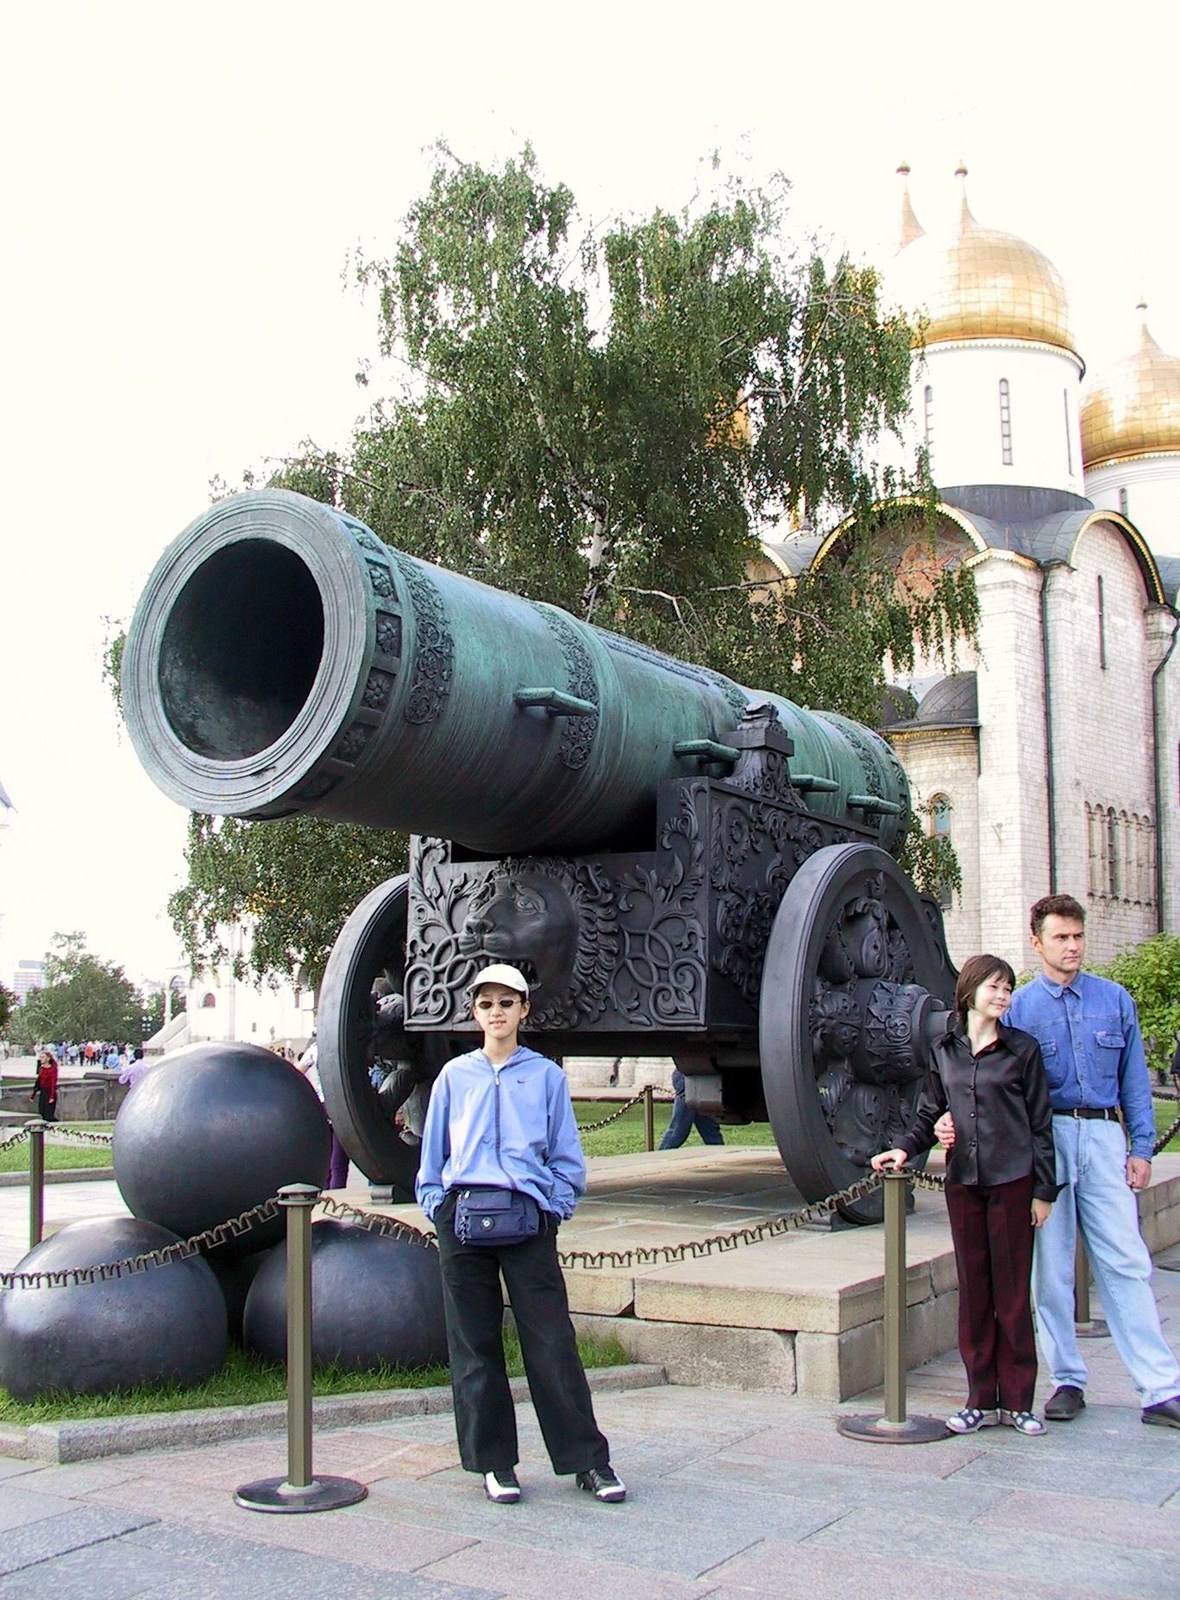 06%20Tsar%20Cannon%20(world's%20largest%20but%20never%20used)%20in%20Kremlin,%20Moscow,%20Russia.jpg